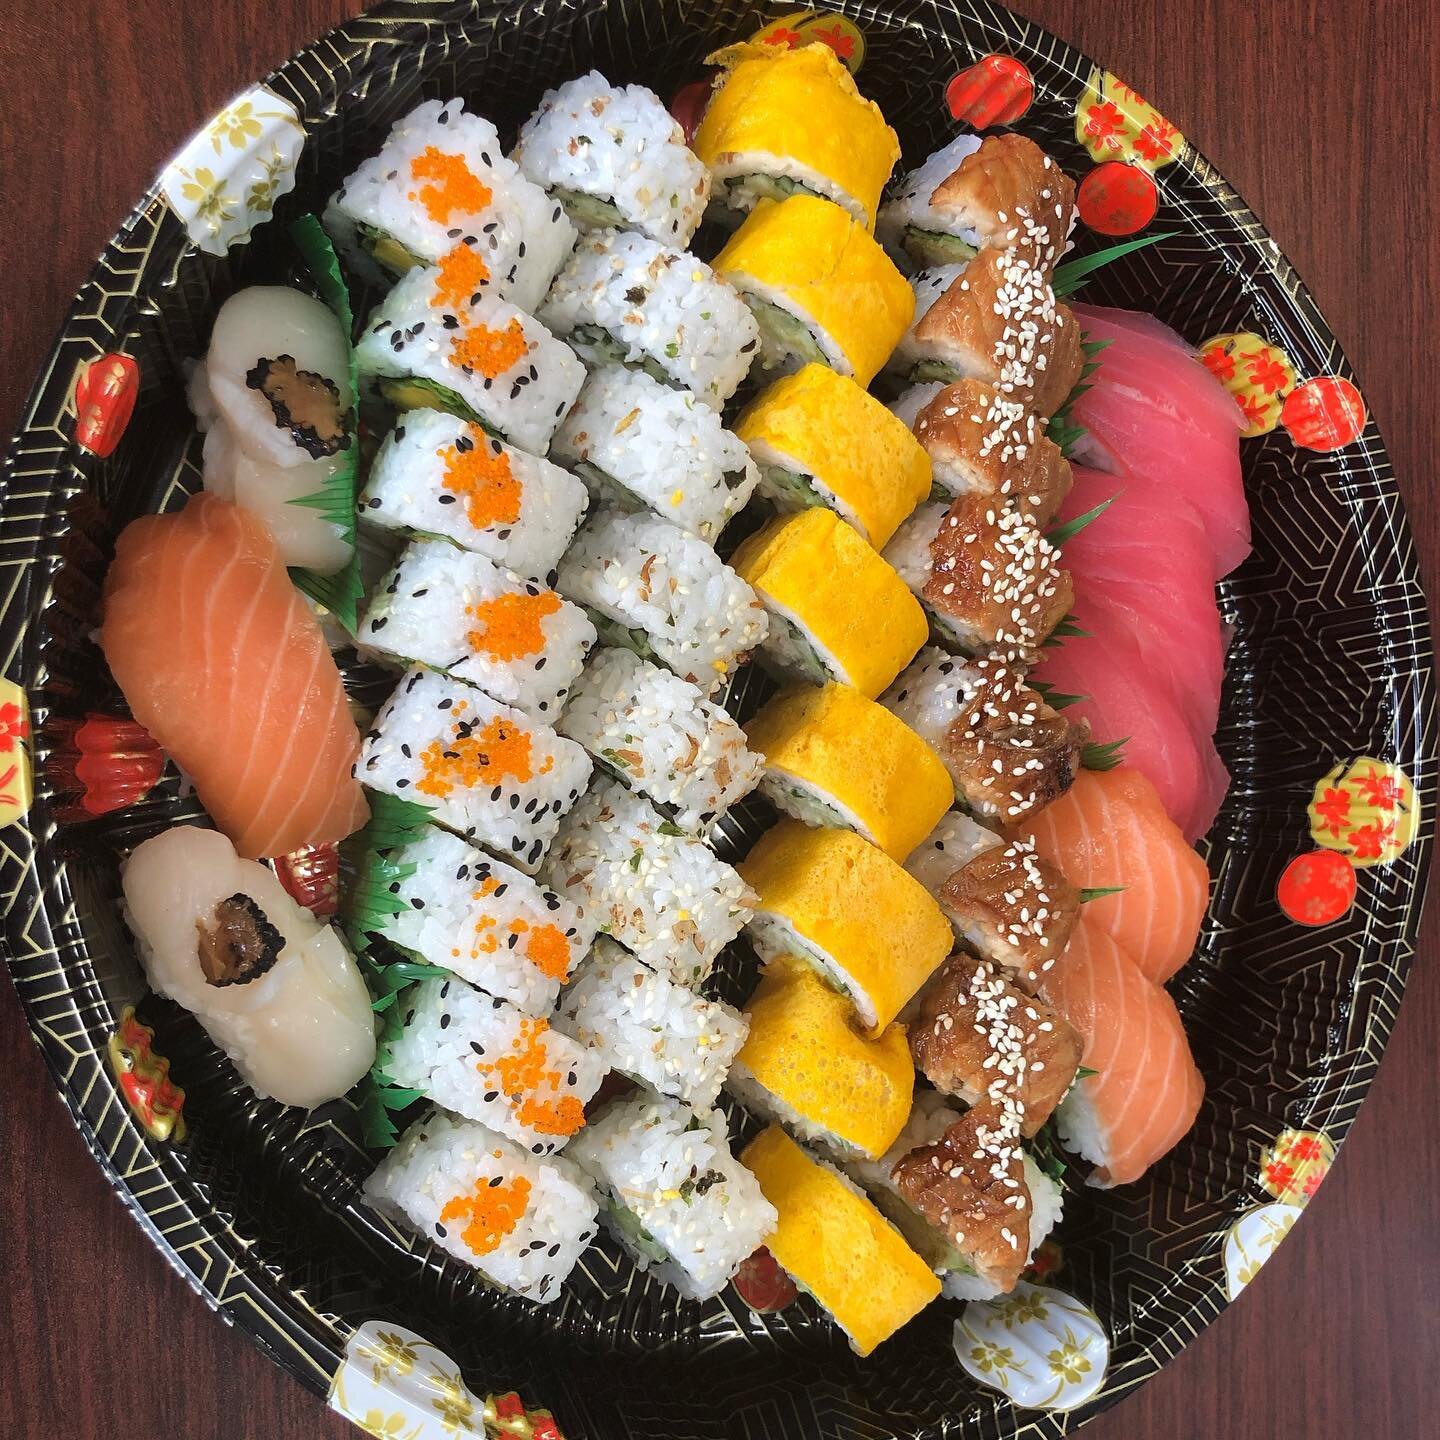 Too cold? Stay in car we do curbside pick up #saskatoonsushi #YXE #YXELocal #yxeeats #yxeliving #yxefood #YXElife #yxesaskatoon #saskatoon #instafood #yqr #yqreats #yqrlocal #saskatooning @visitsaskatoon #livingyxe #shoplocalyxe #shoplocal #saskatoon